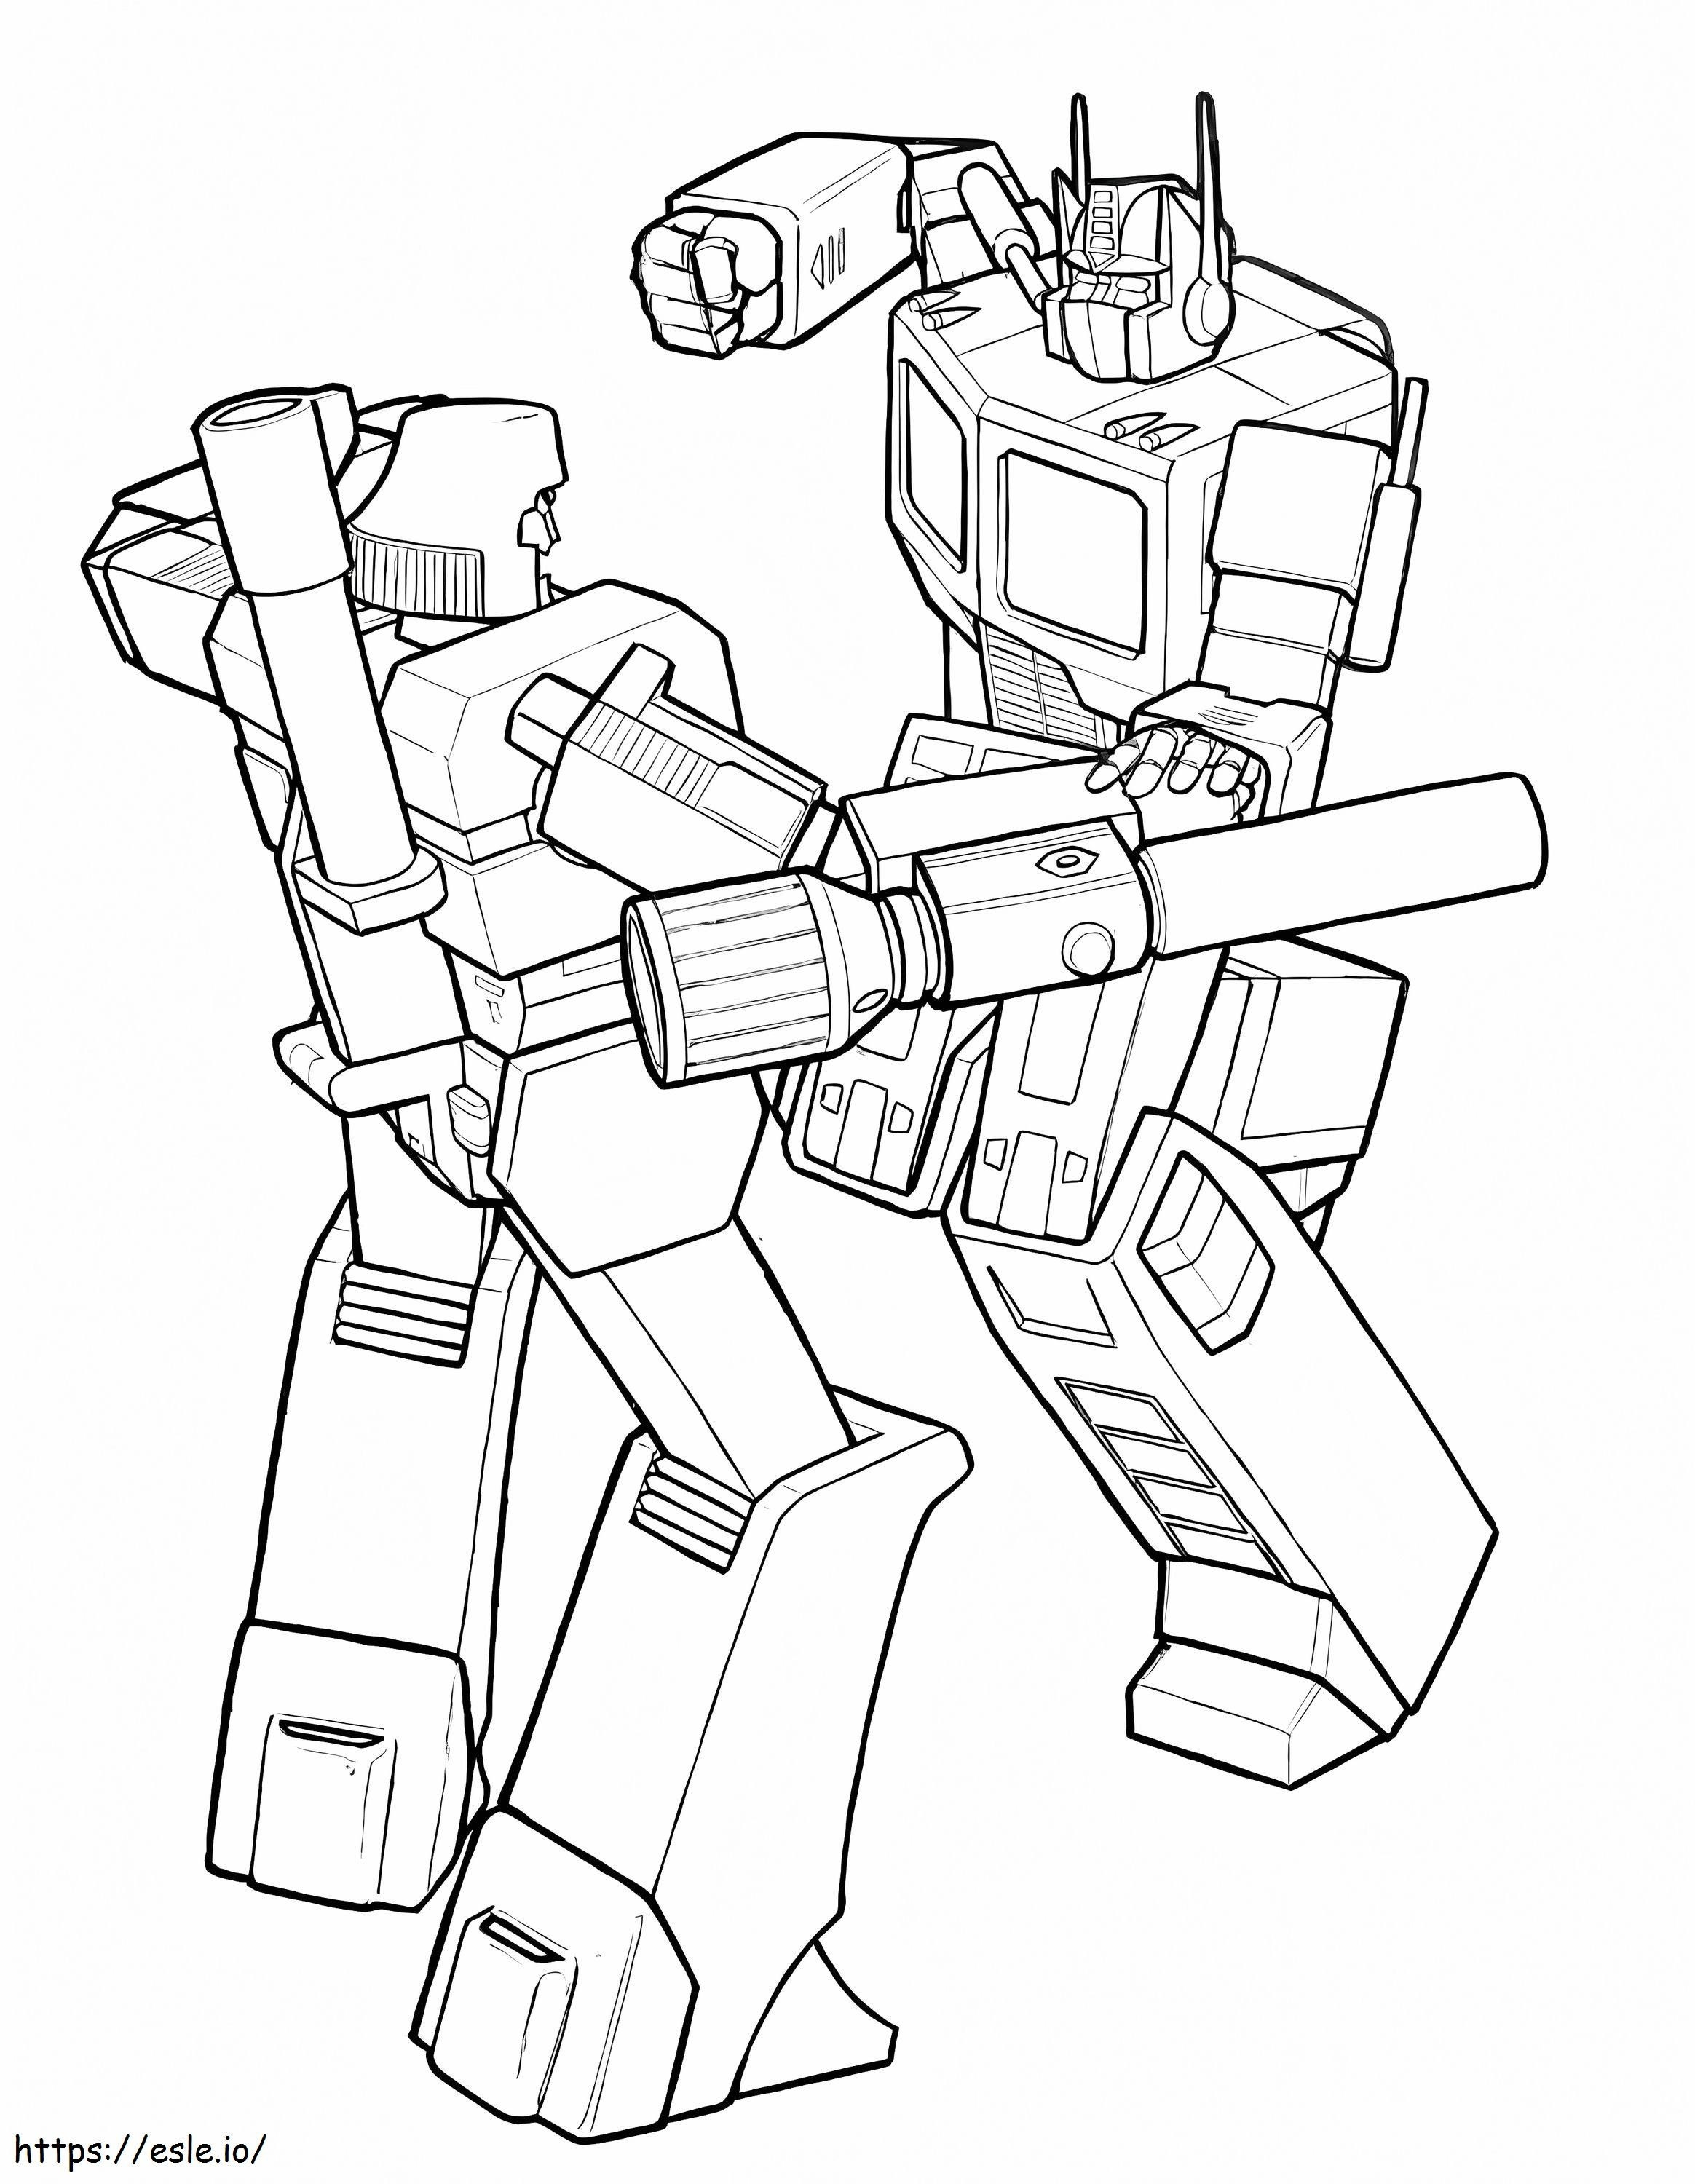 Megatron and optimus prime coloring page